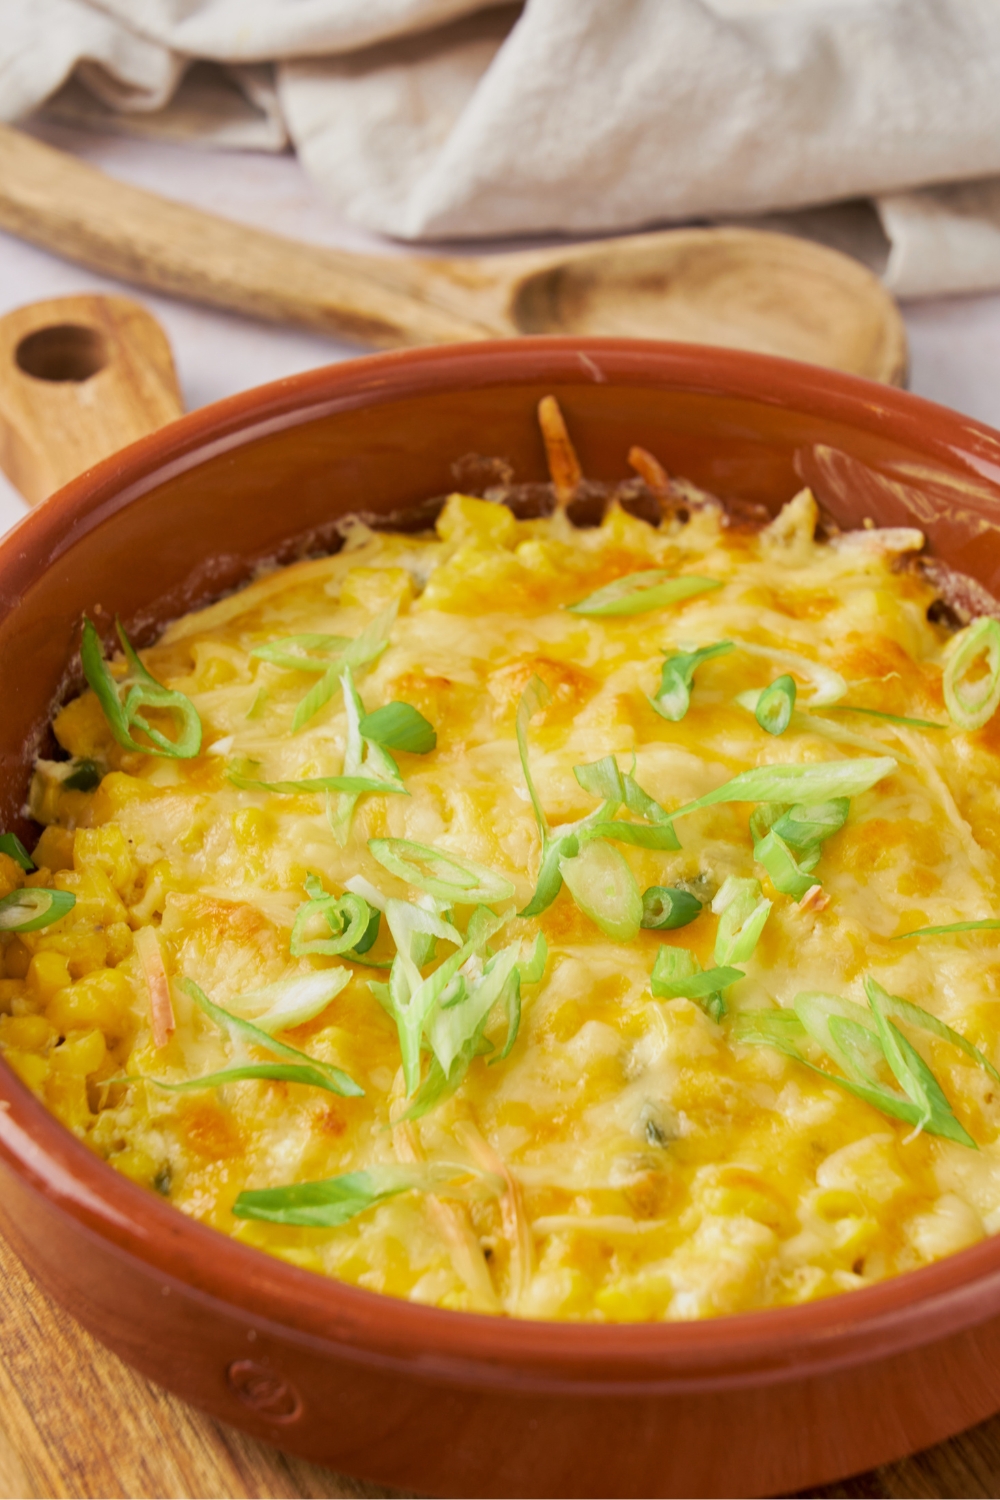 Melted cheese on top of jalapeno corn casserole in a red dish